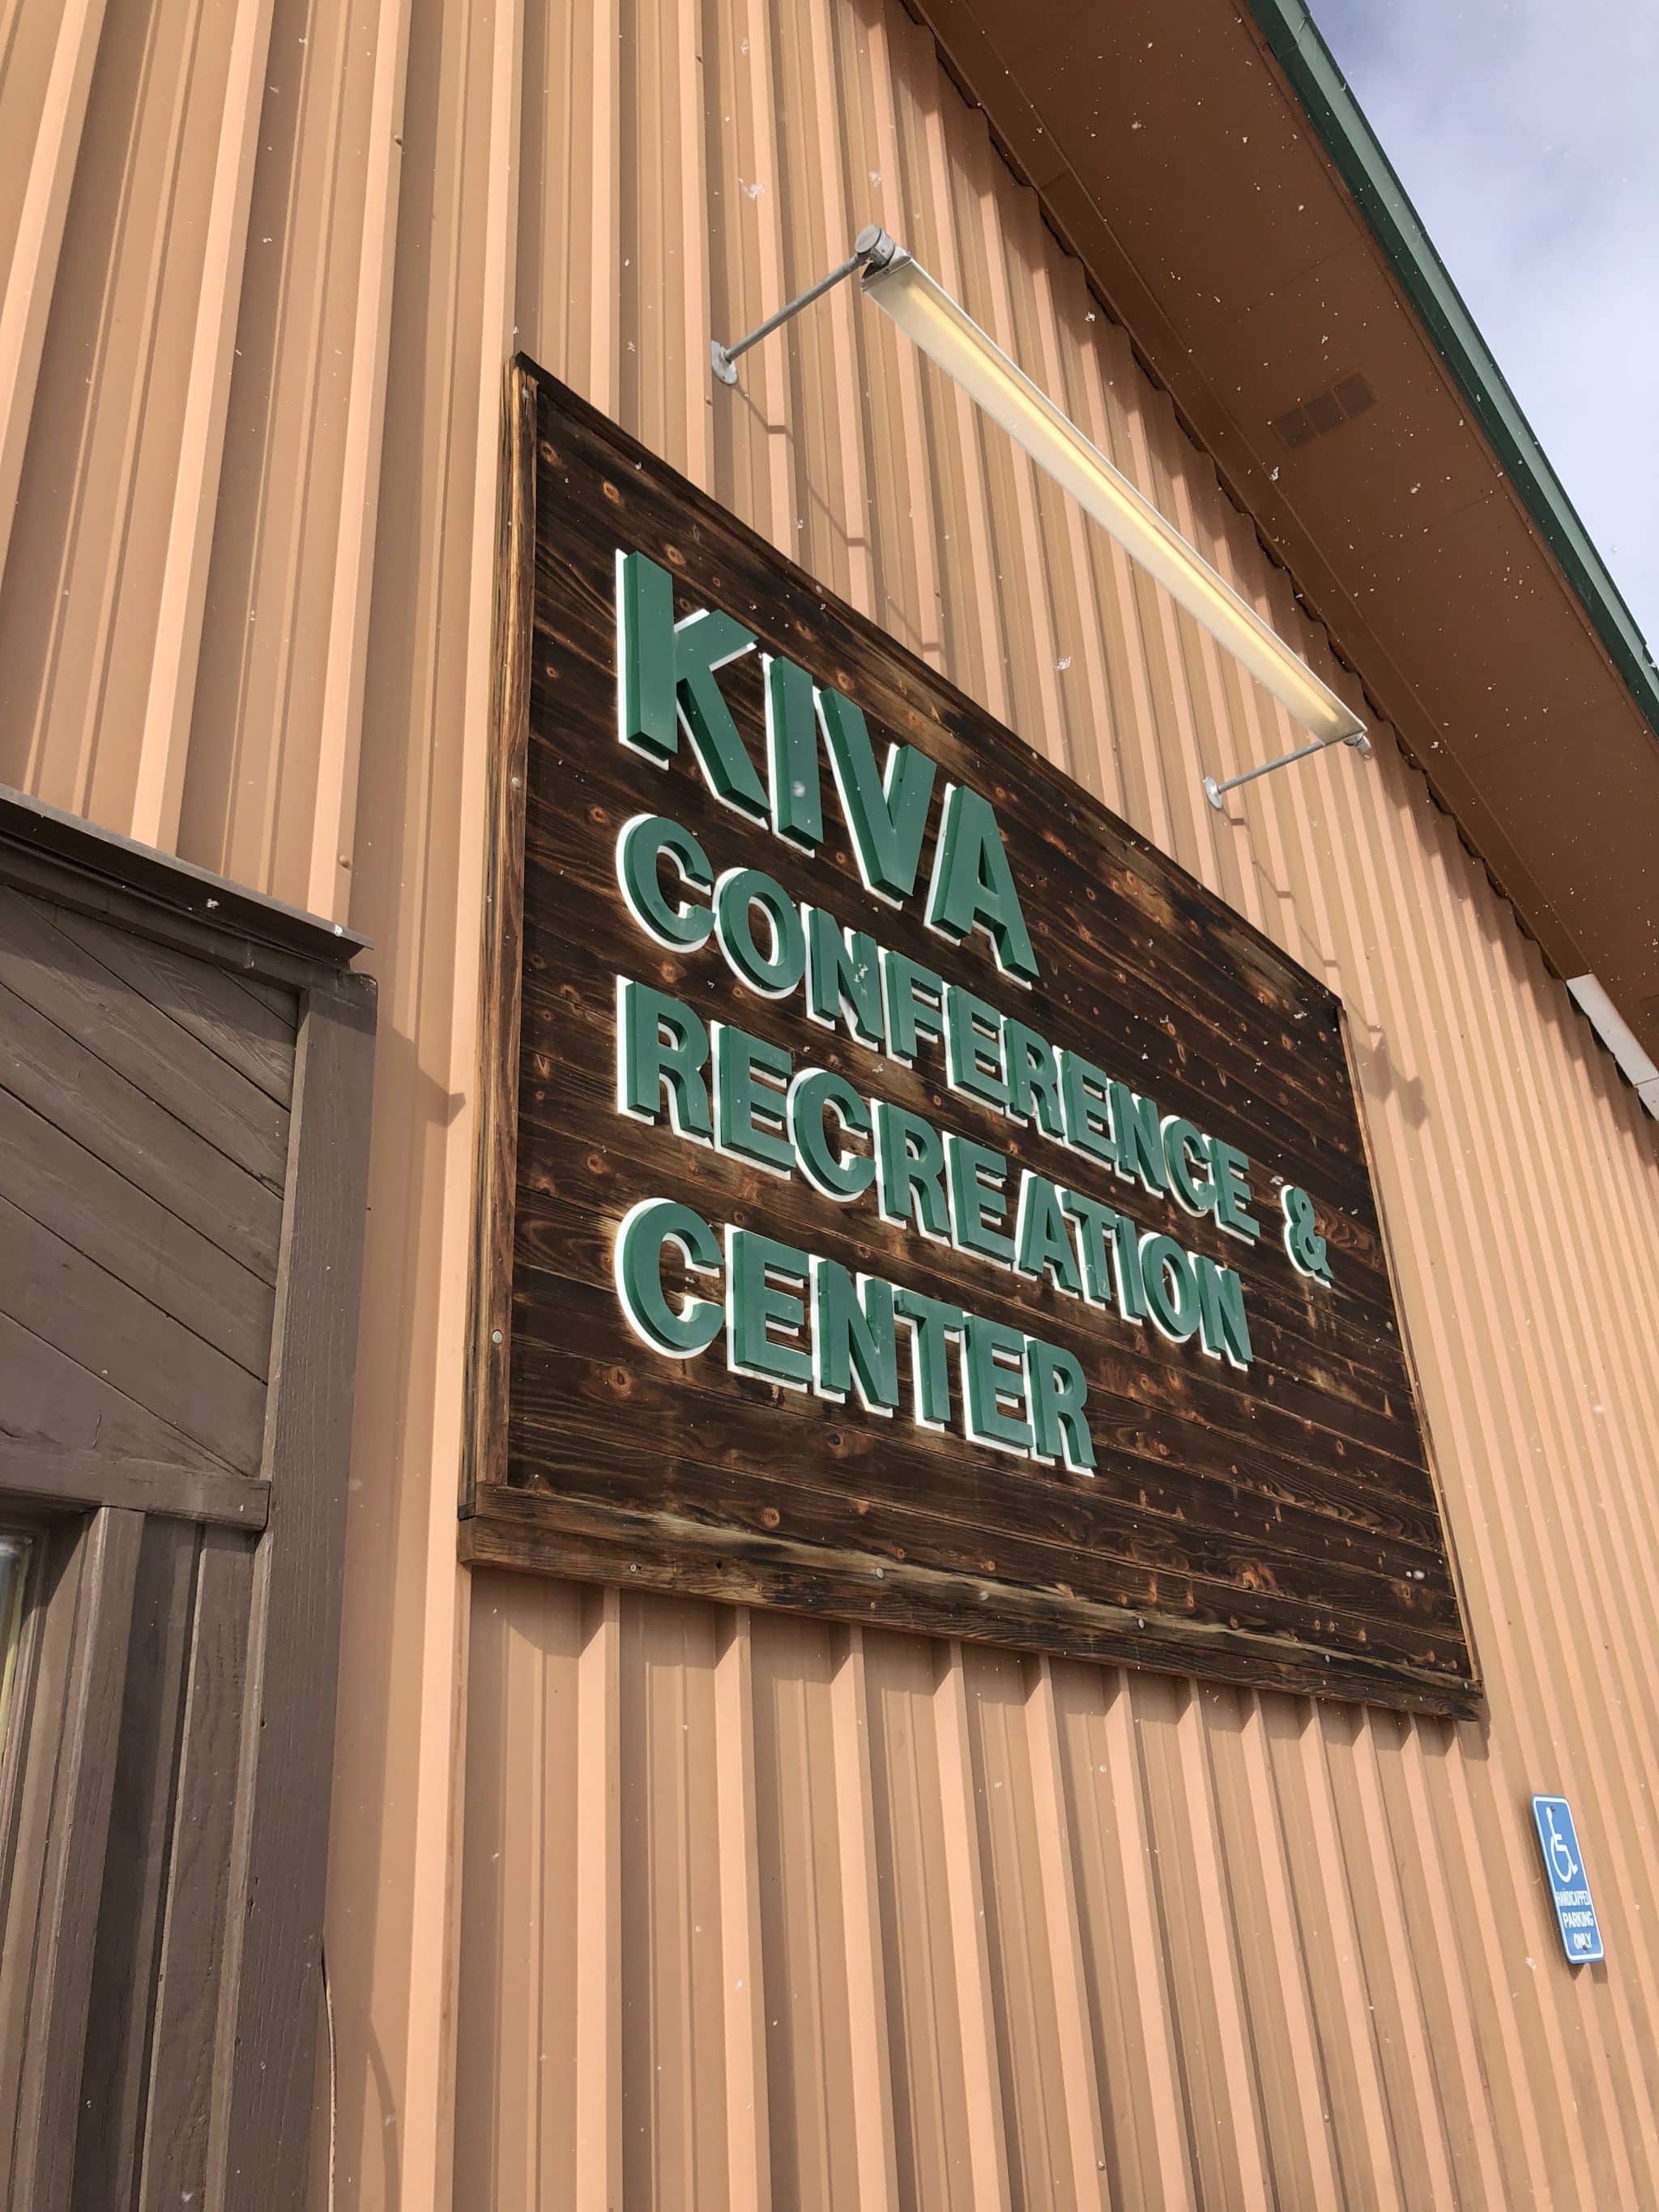 Kiva COnference and Recreation Center